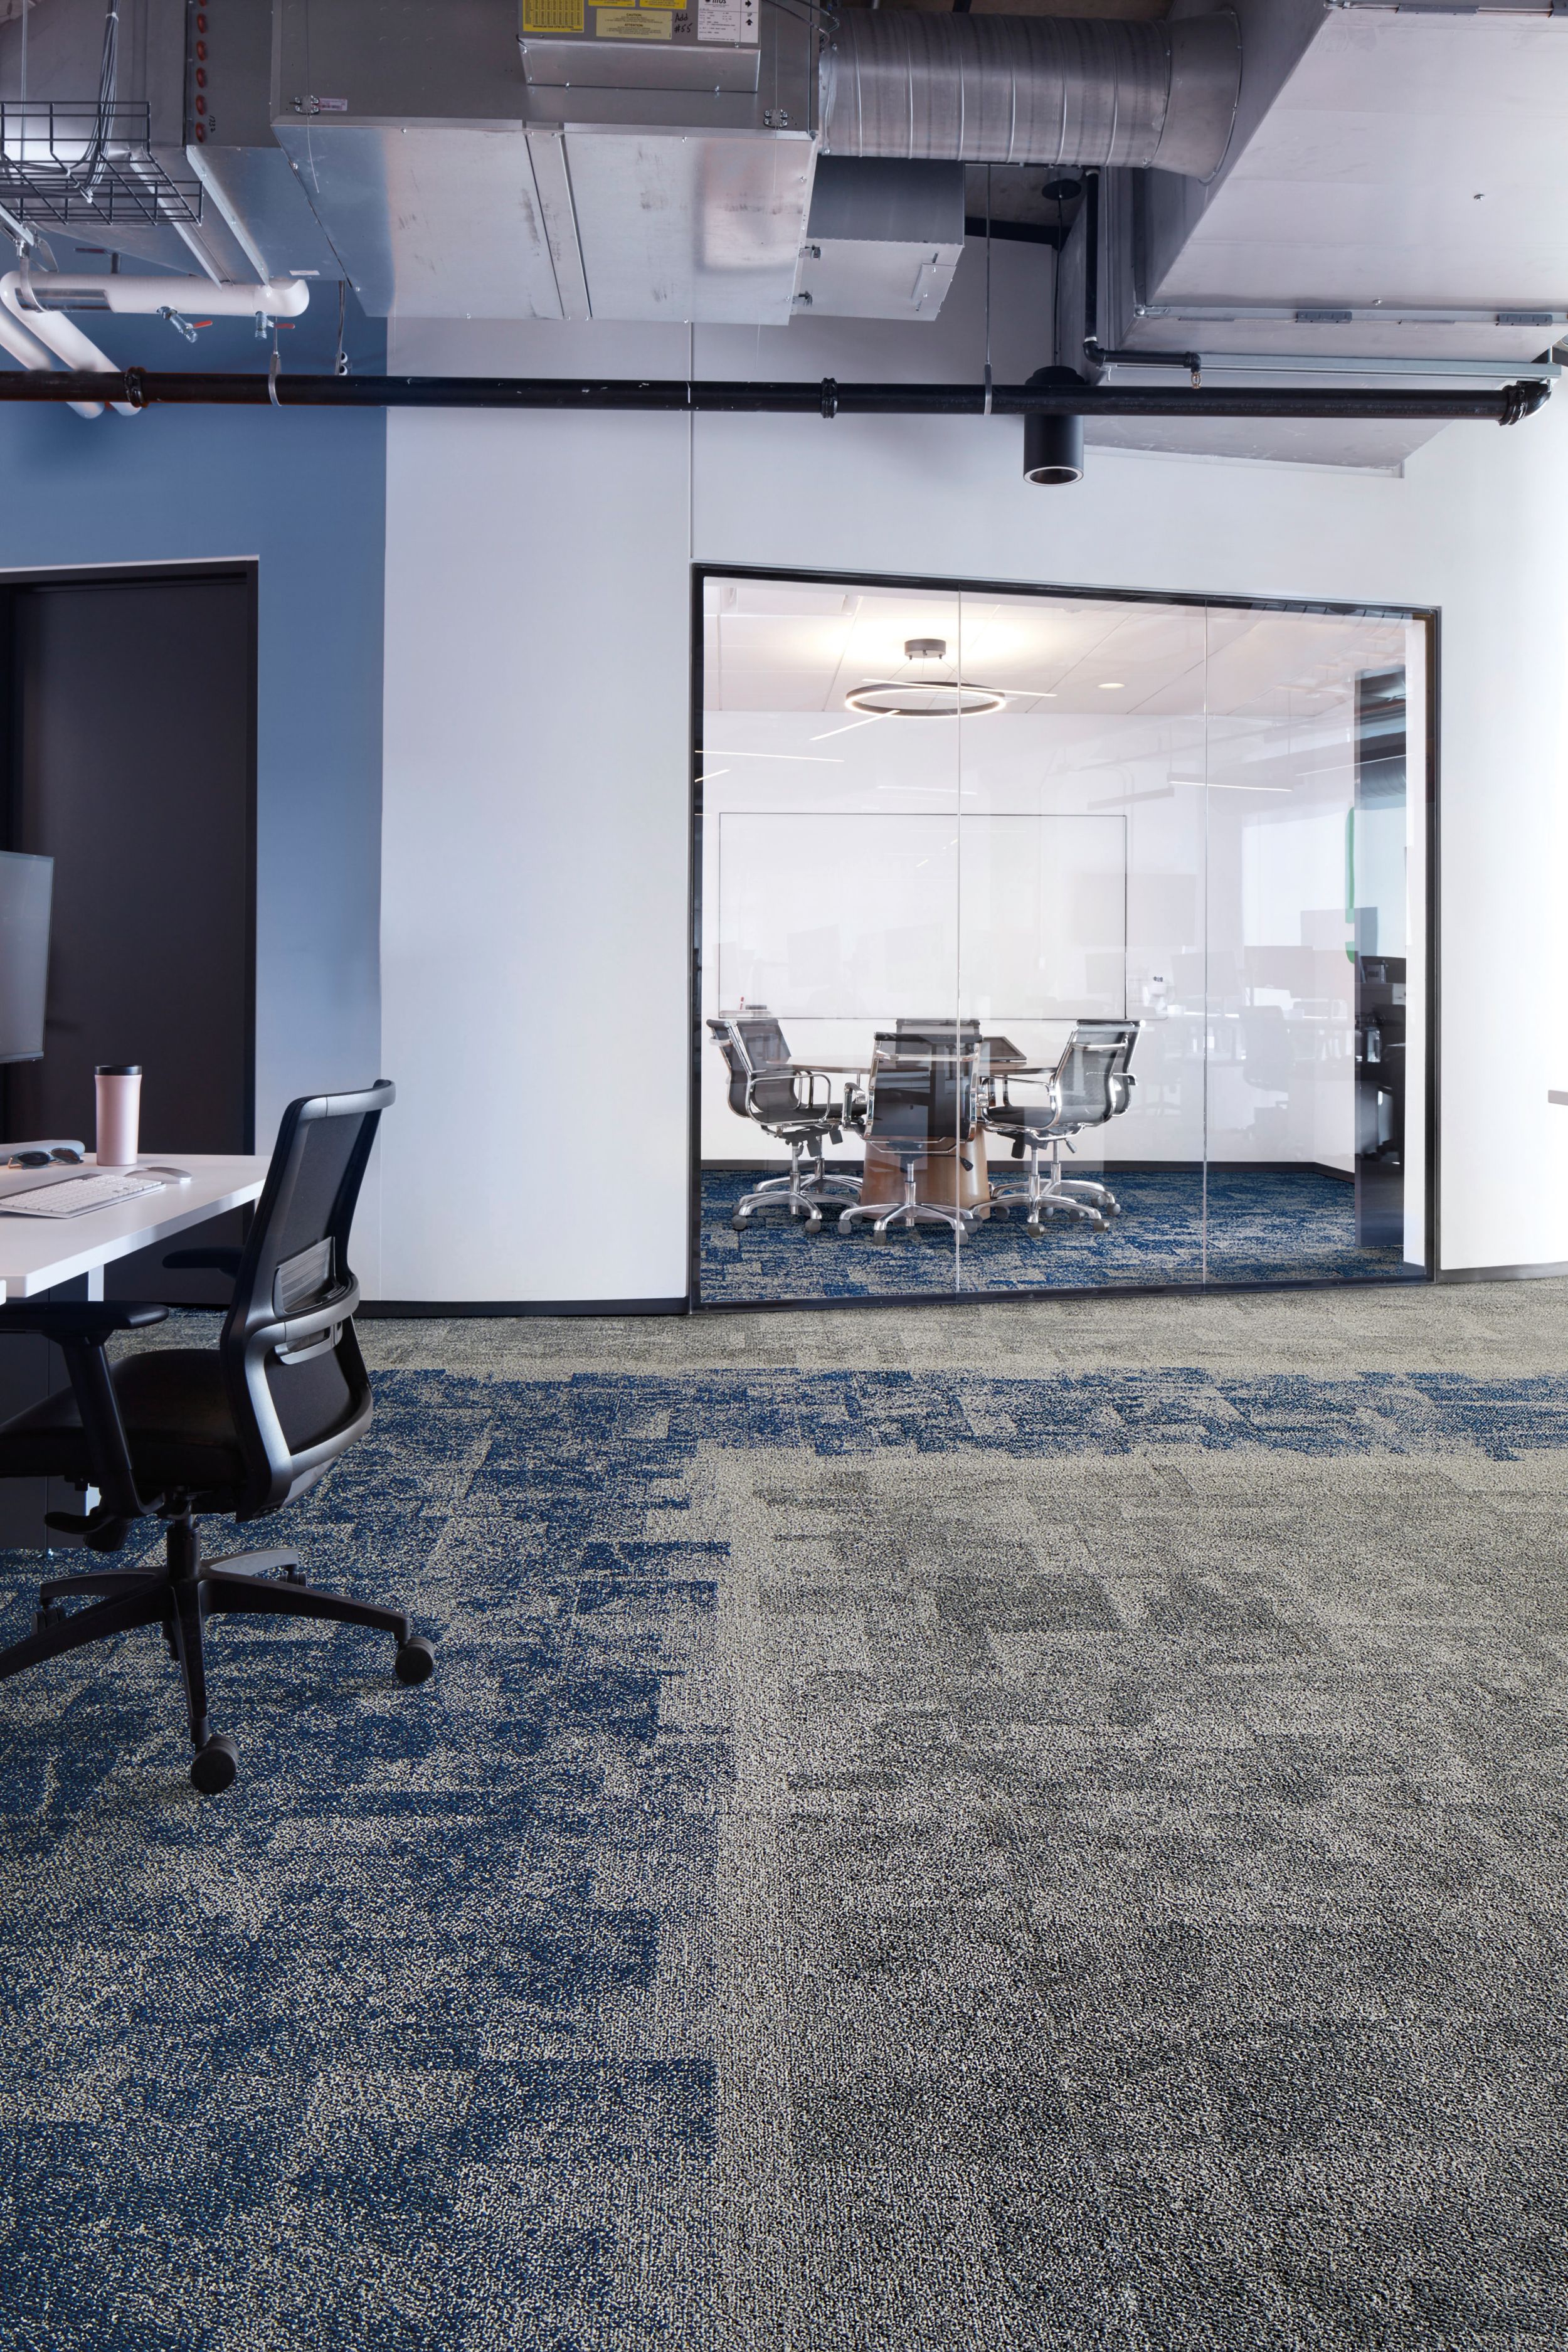 Interface Open Air 404 carpet tile with meeting room in background with glass wall número de imagen 1